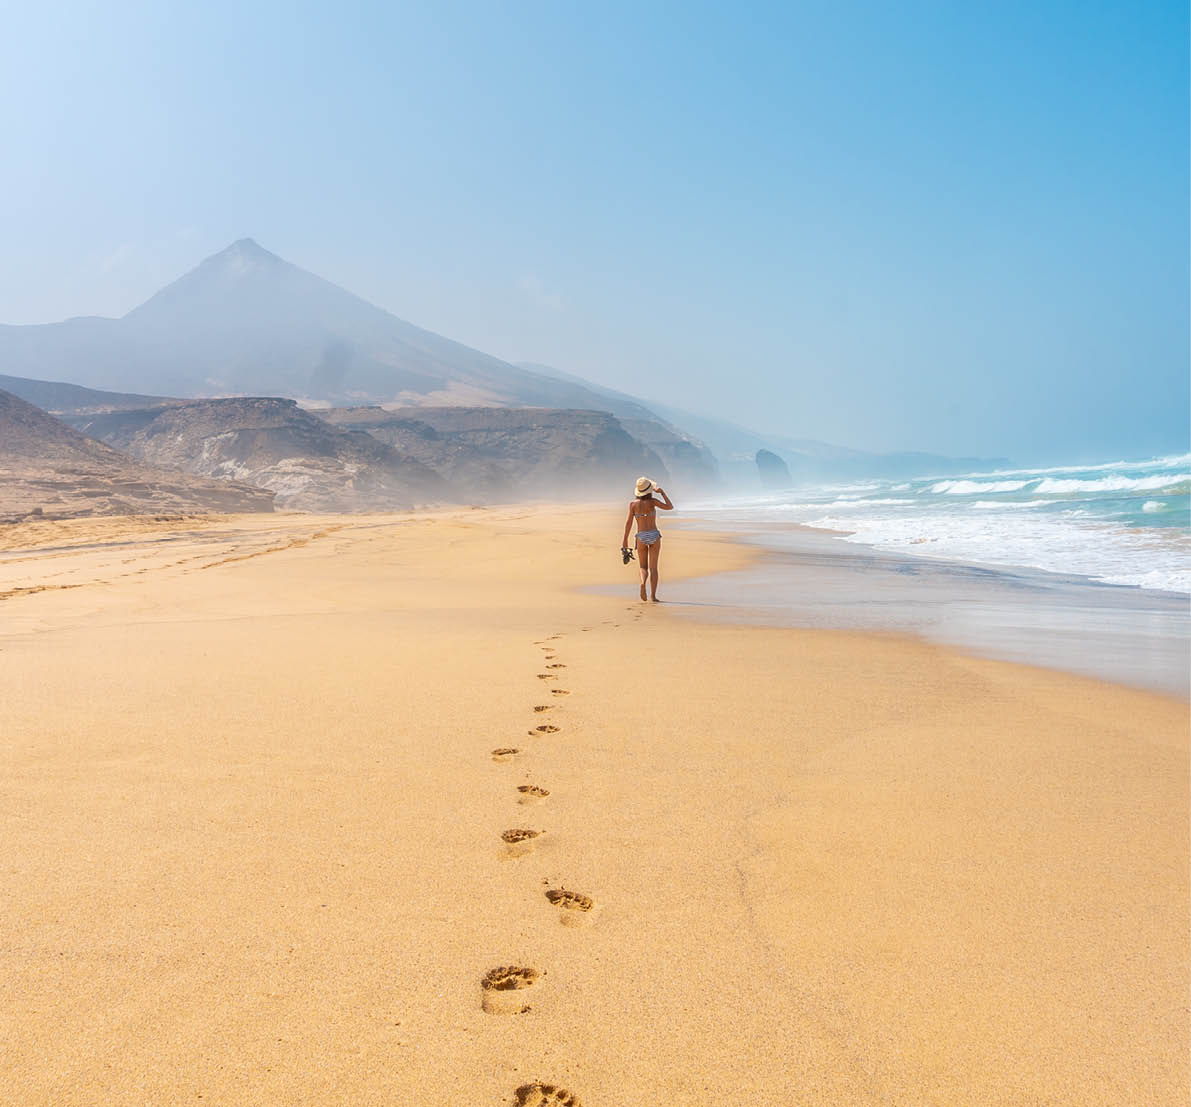 A young tourist walking alone on the wild beach Cofete in the natural park of Jandia, Barlovento coast, south of Fuerteventura, Canary Islands. Spain